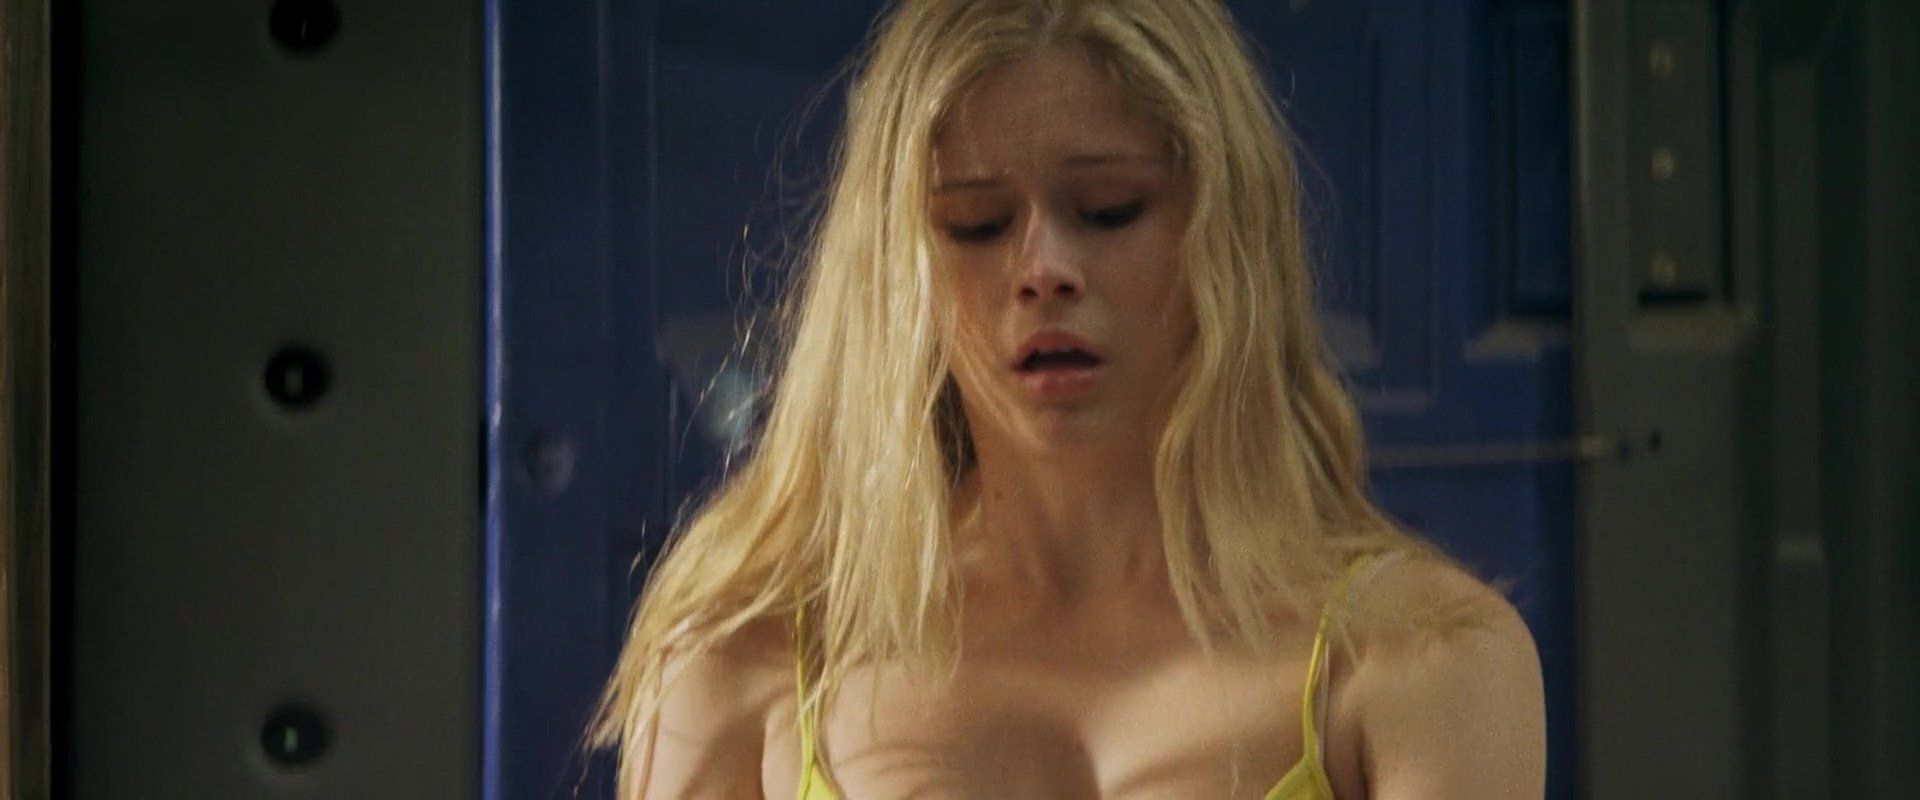 Erin moriarty leaked